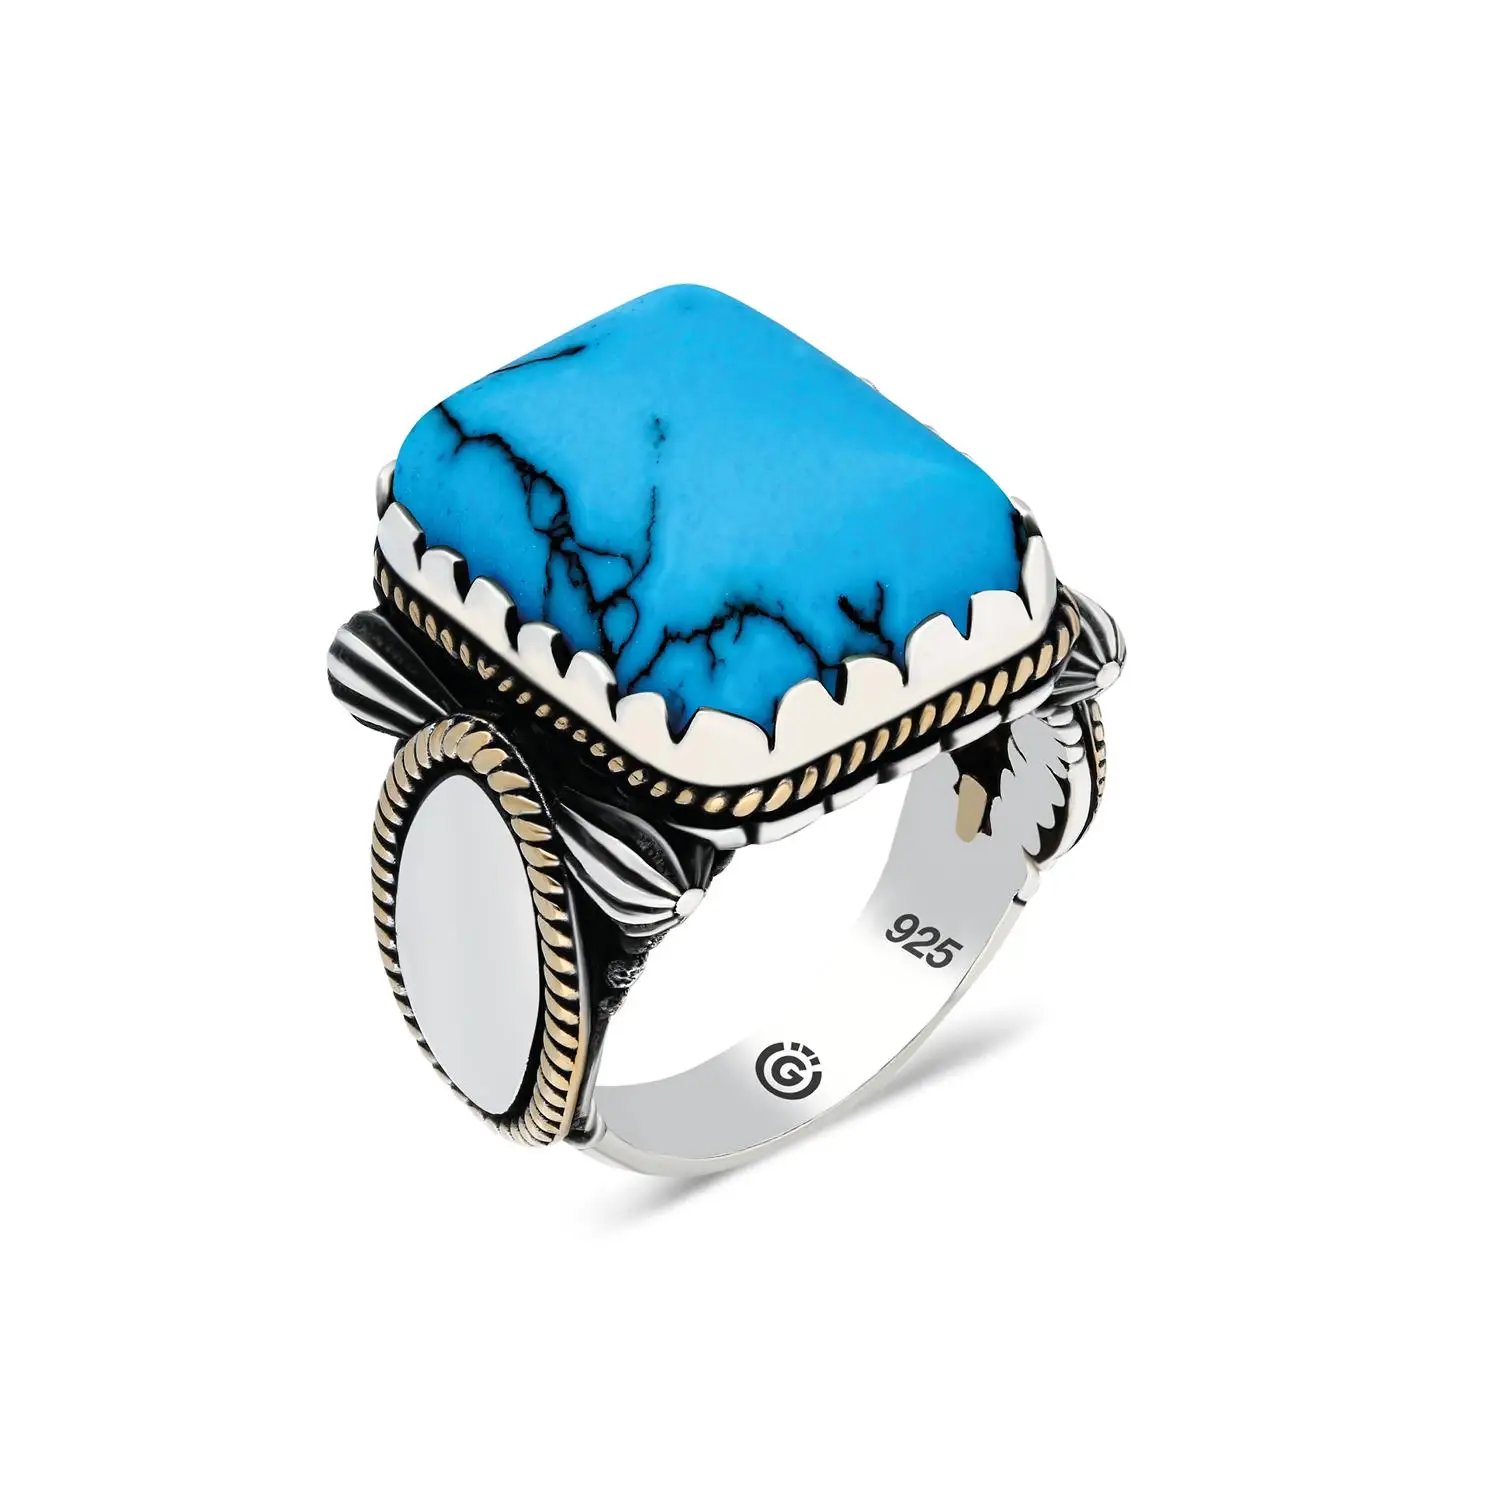 

Solid 925 Sterling Silver Ring with Raw Square Blue Turquoise Gemstone and Vintage Style Made in Turkey Gift for Men